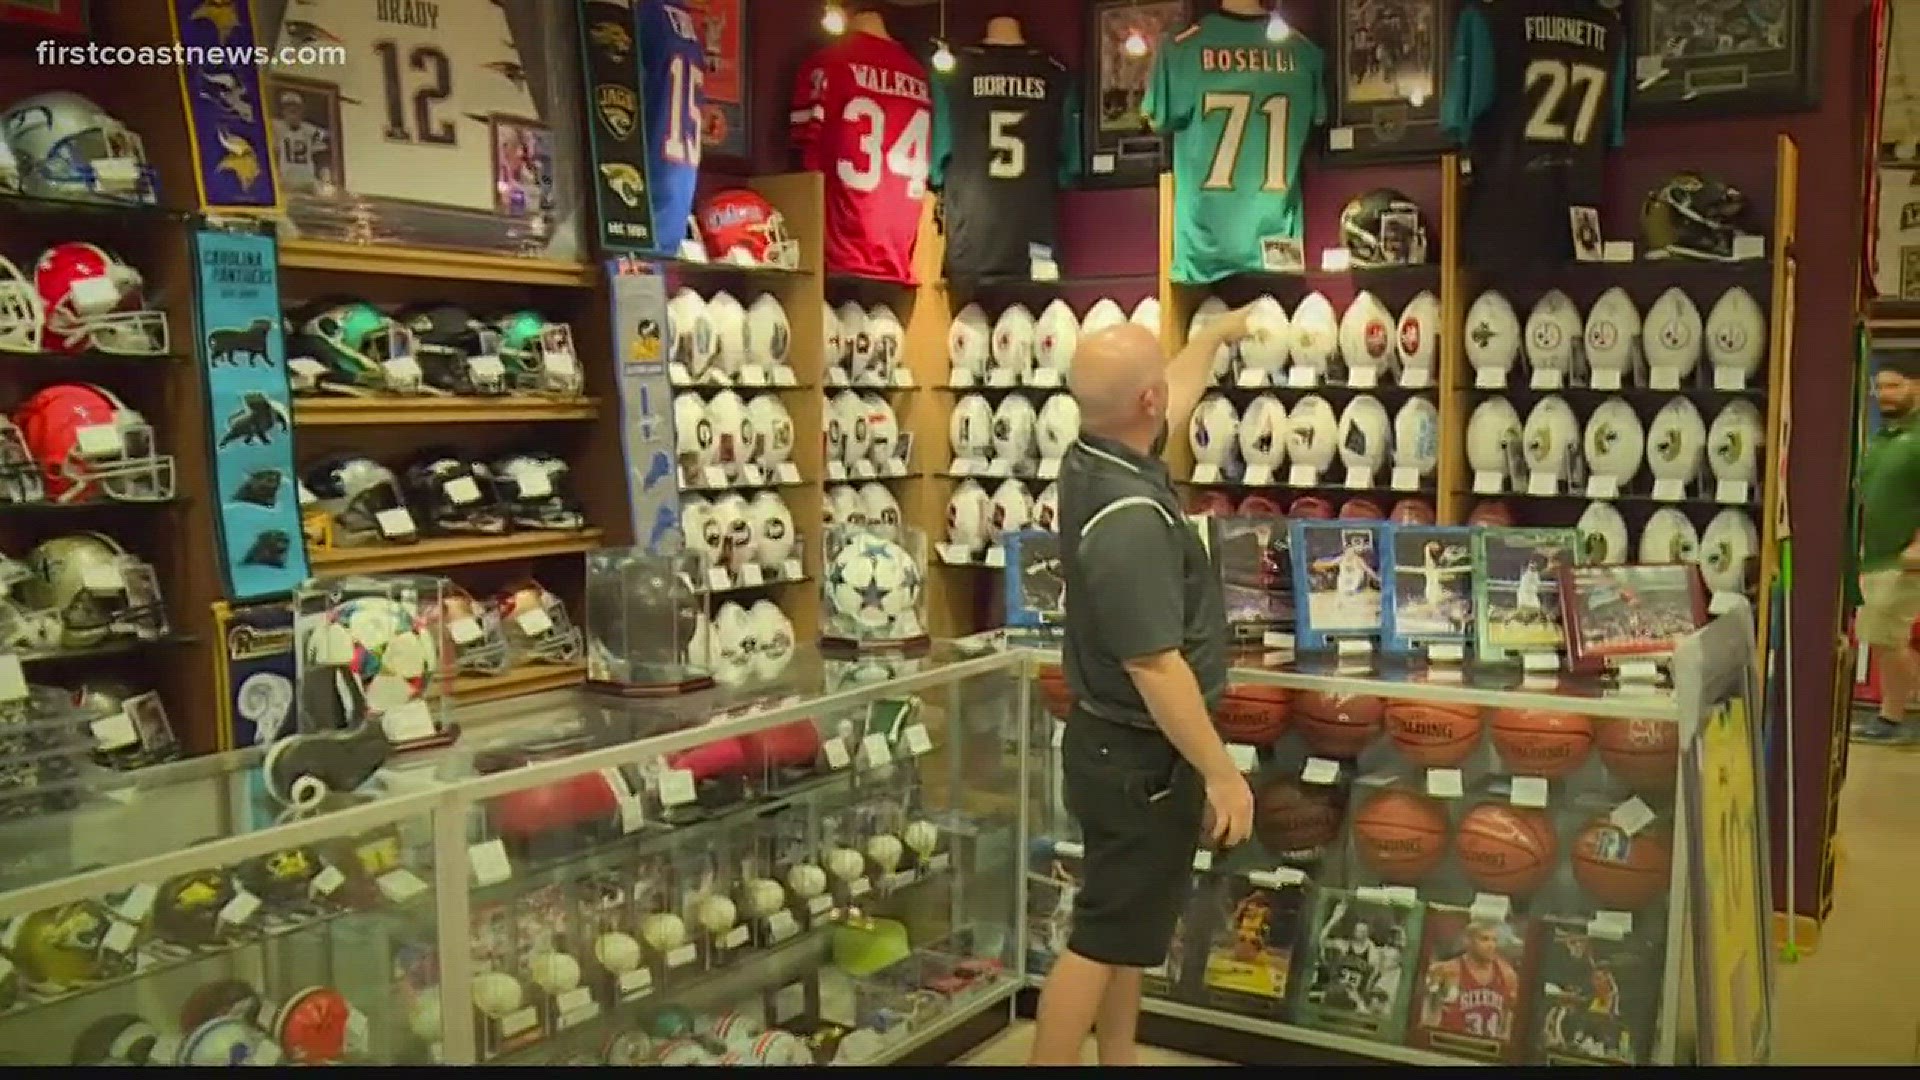 A Jacksonville business owner is planning to make the trek to Pittsburgh this weekend for the big game.